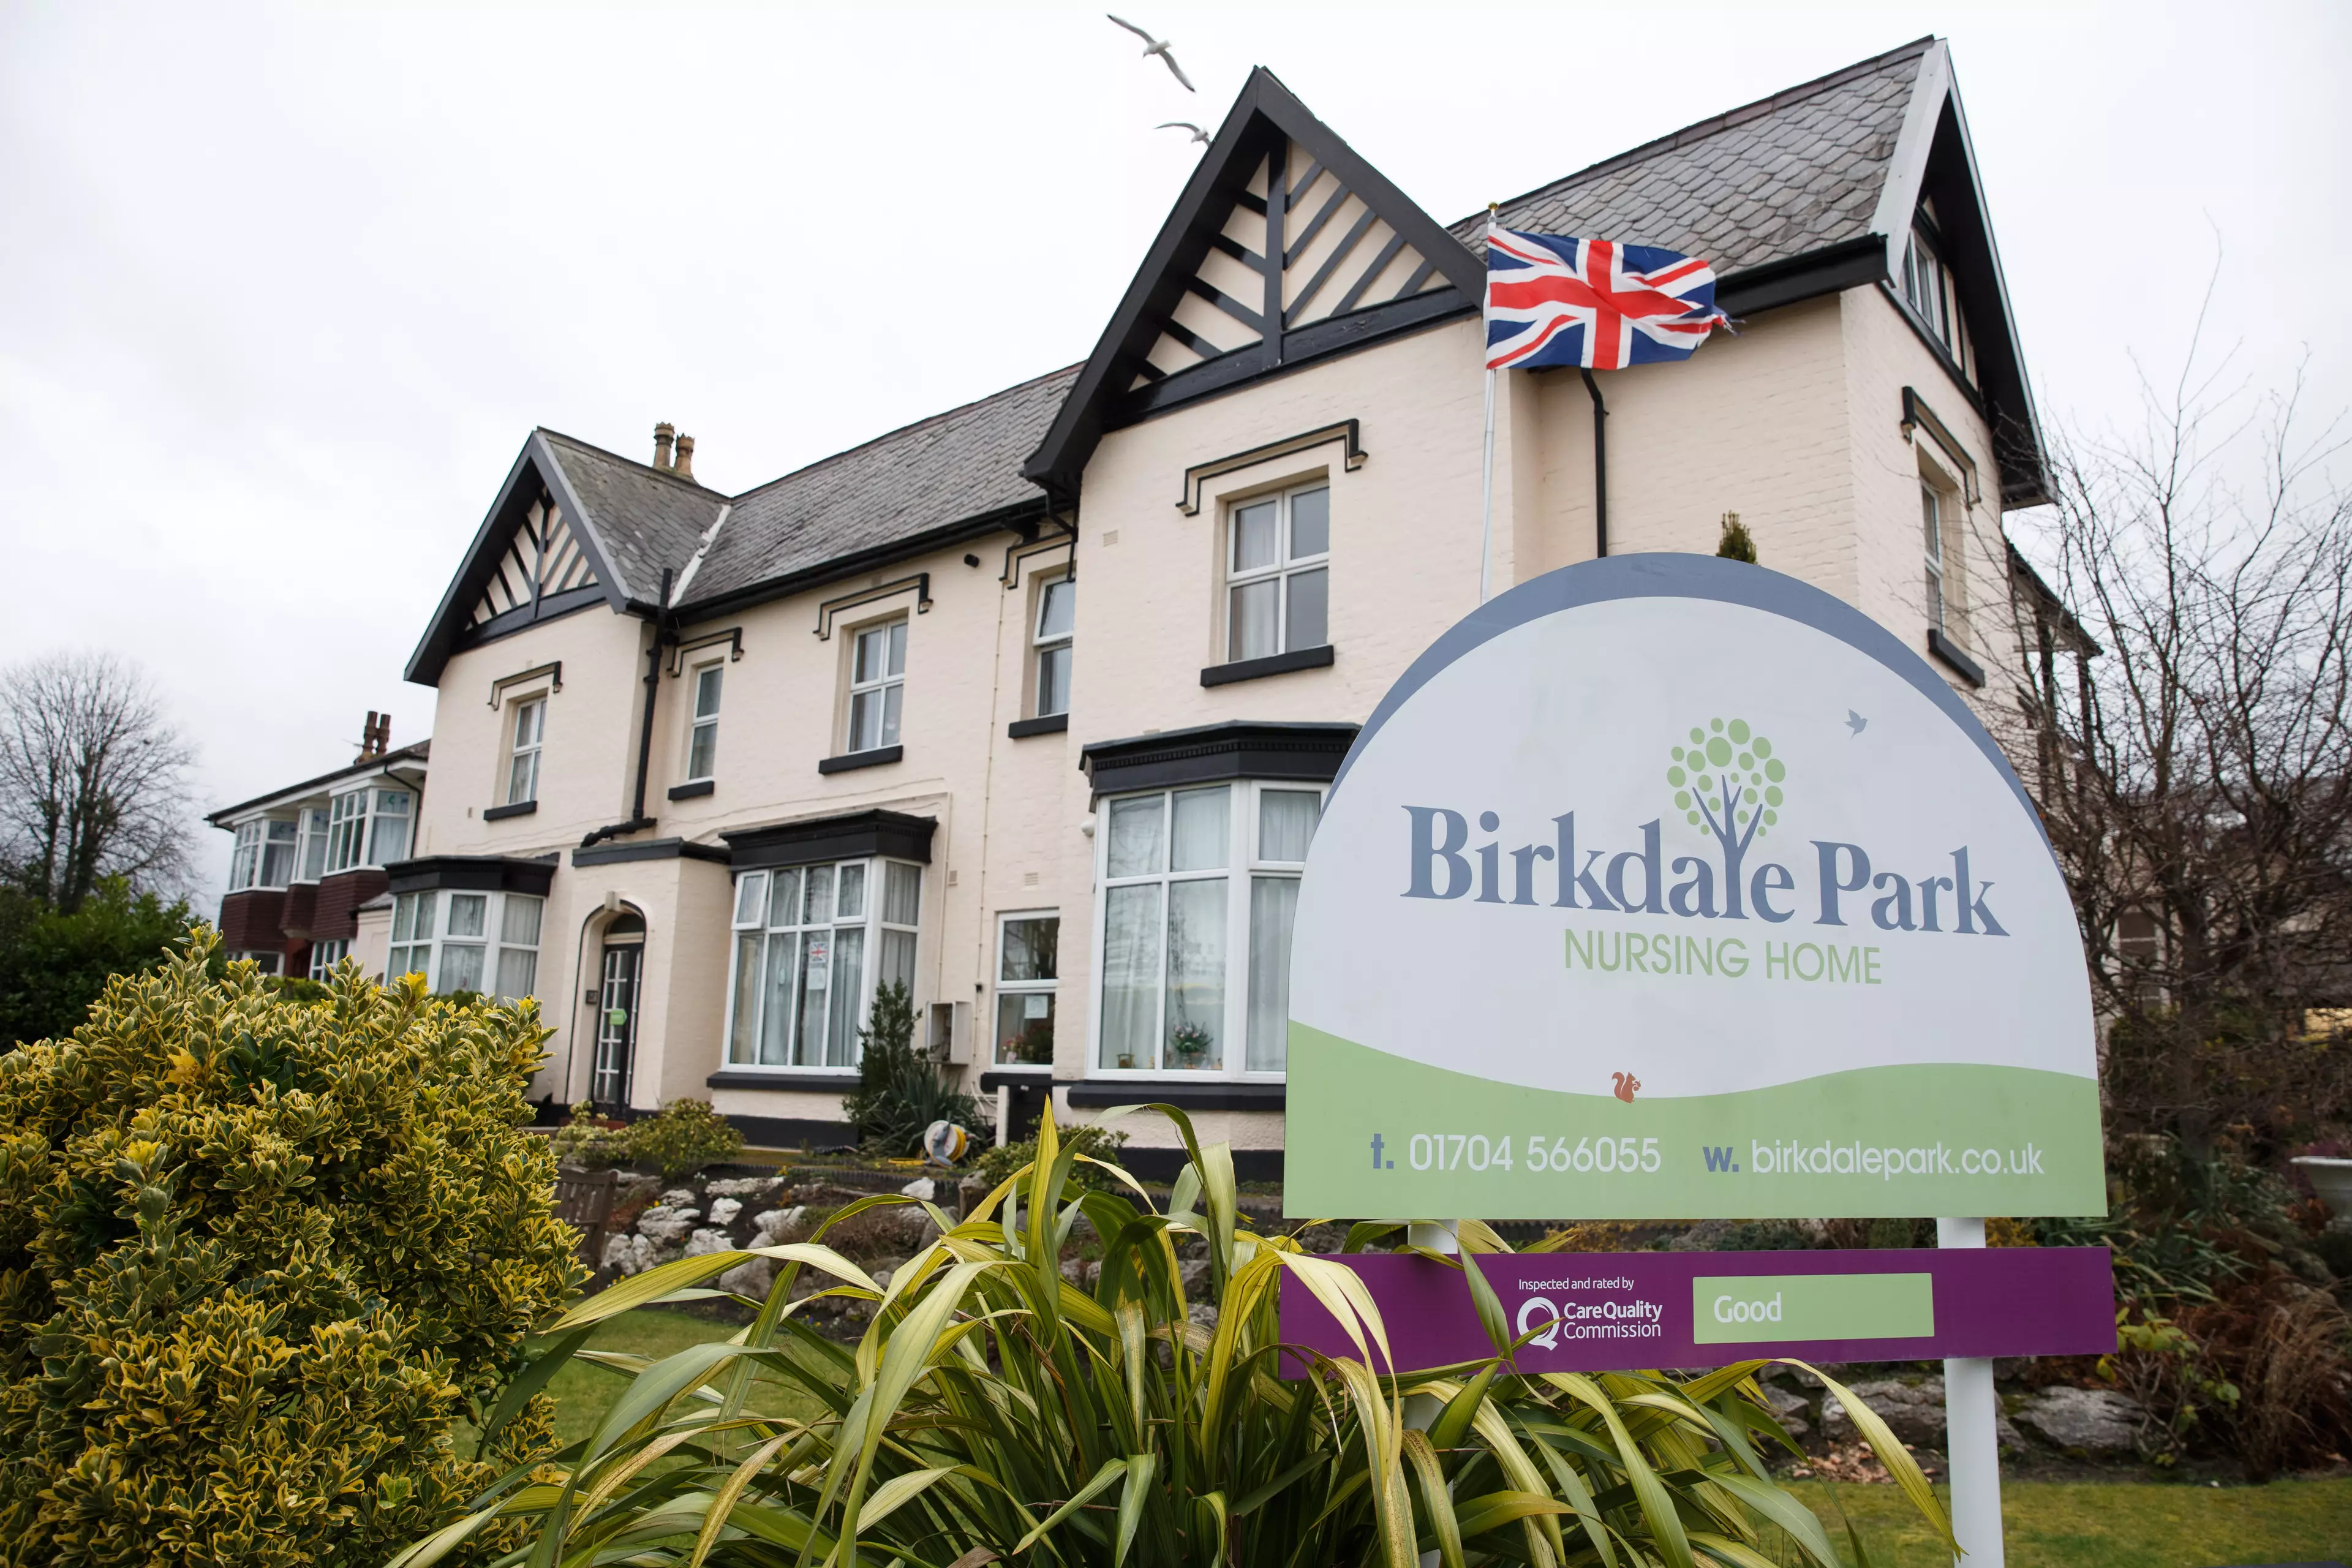 The Birkdale Care Home in Southport has allowed multiple visitors and kept residents from feeling isolated by bringing in entertainers - all without suffering an outbreak of Covid (